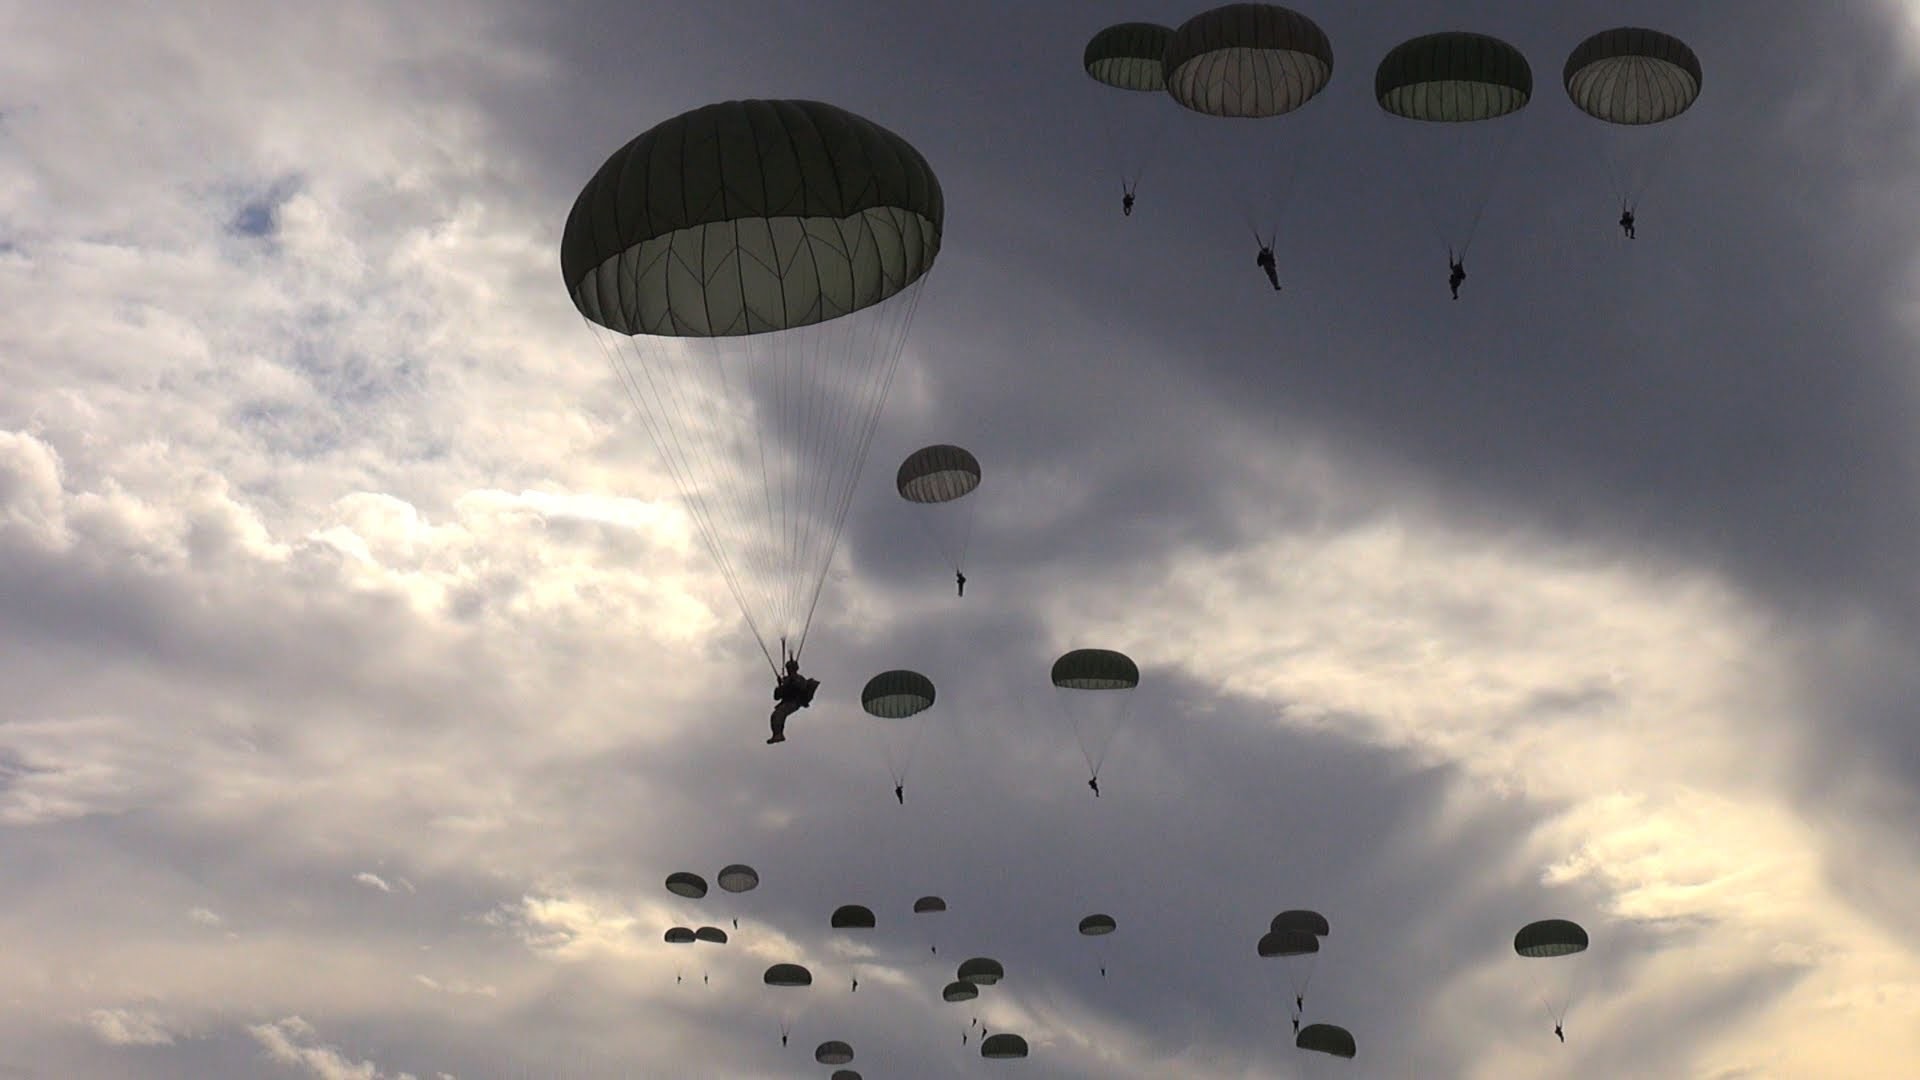 1920x1080 Inside the Army's 82nd Airborne Division: Parachuting from a C-130 Aircraft  - YouTube